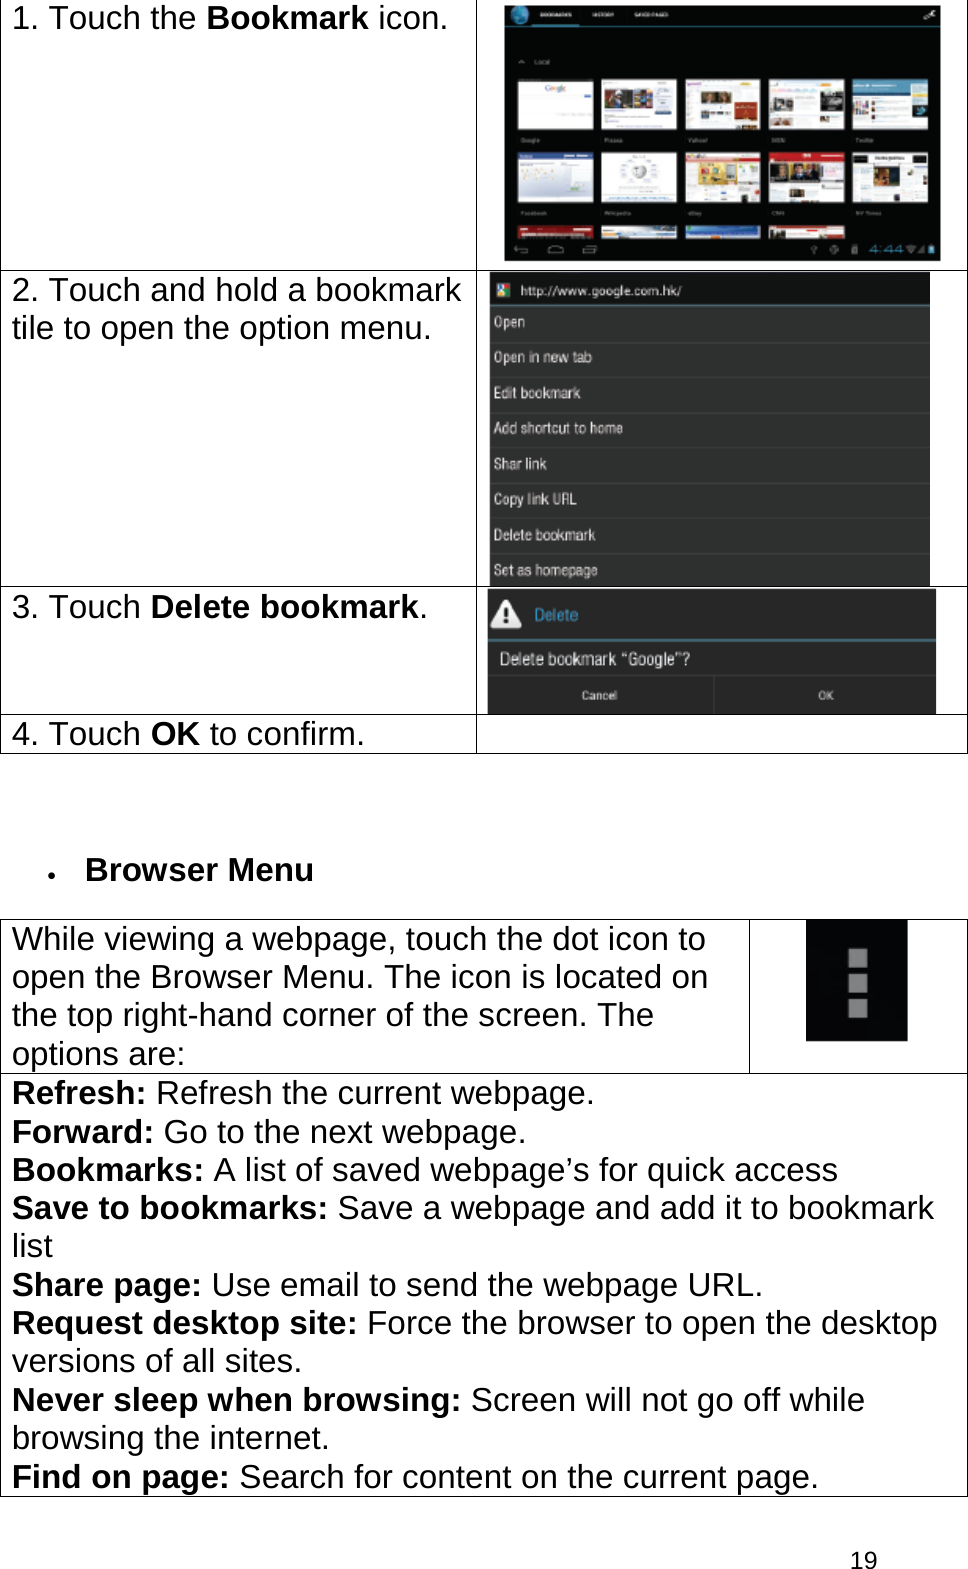  19 1. Touch the Bookmark icon.   2. Touch and hold a bookmark tile to open the option menu.   3. Touch Delete bookmark.  4. Touch OK to confirm.   • Browser Menu While viewing a webpage, touch the dot icon to open the Browser Menu. The icon is located on the top right-hand corner of the screen. The options are:  Refresh: Refresh the current webpage. Forward: Go to the next webpage. Bookmarks: A list of saved webpage’s for quick access Save to bookmarks: Save a webpage and add it to bookmark list Share page: Use email to send the webpage URL. Request desktop site: Force the browser to open the desktop versions of all sites. Never sleep when browsing: Screen will not go off while browsing the internet. Find on page: Search for content on the current page. 